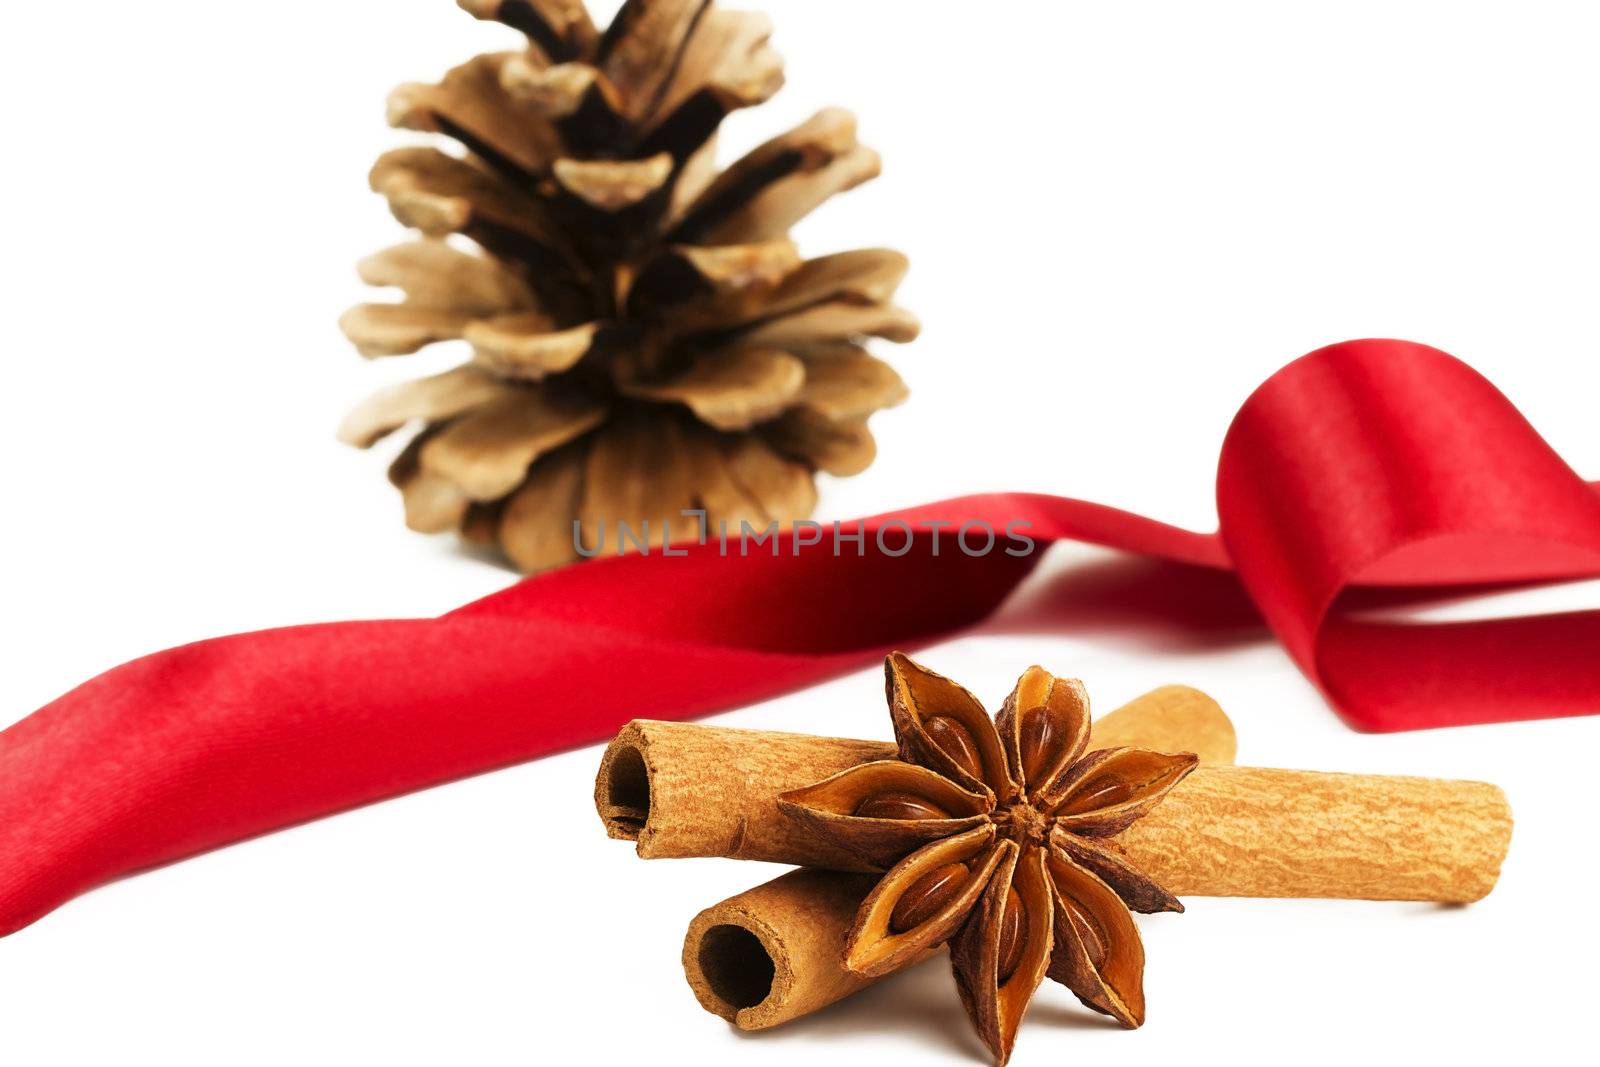 star anise cinnamon sticks conifer cone and a red ribbon  by RobStark